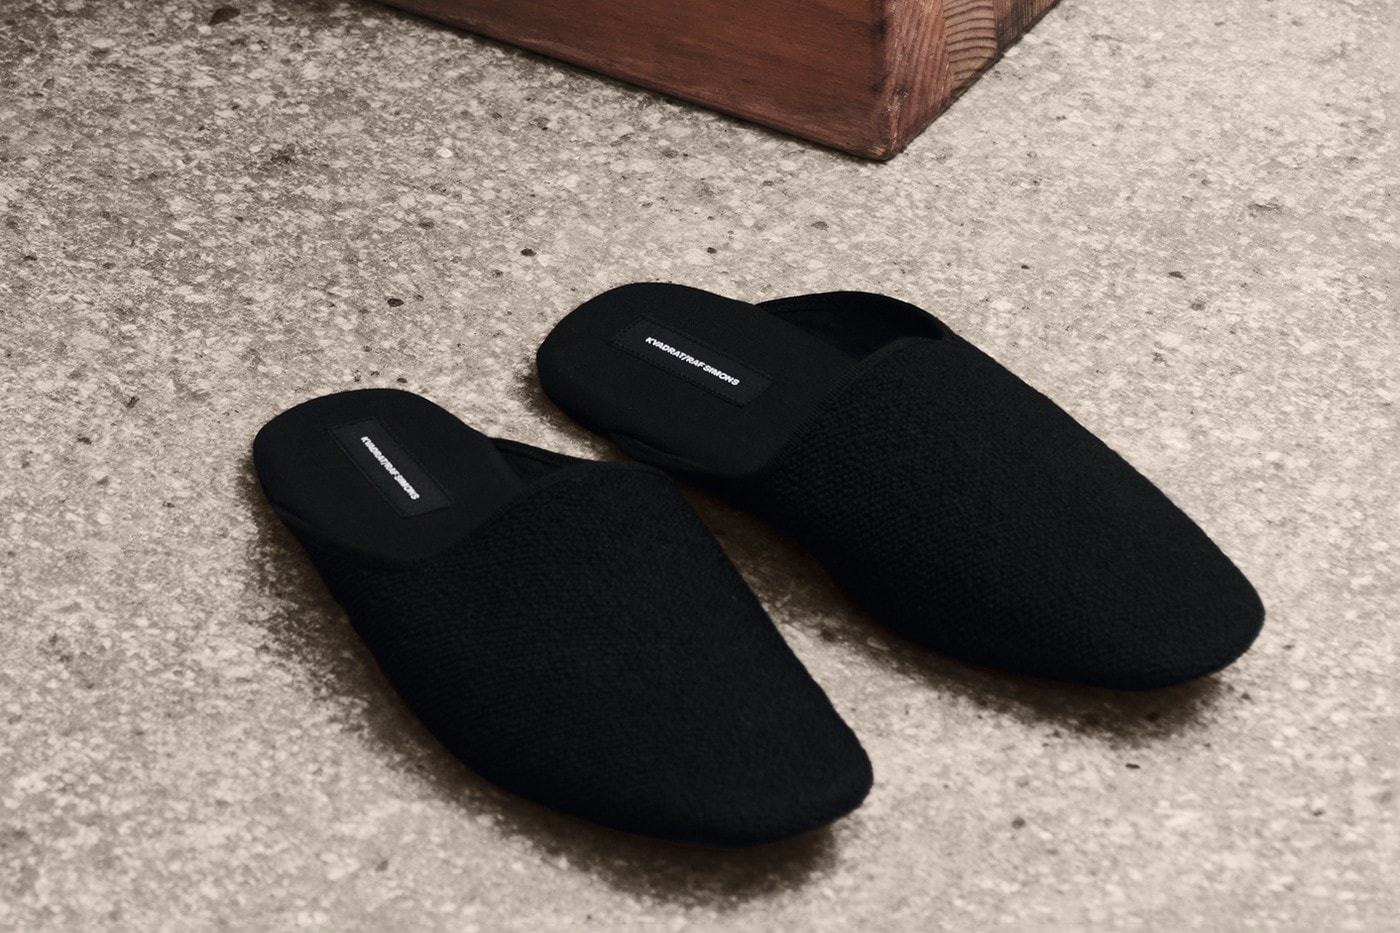 kvadrat raf simons shaker collection second collab release where to buy